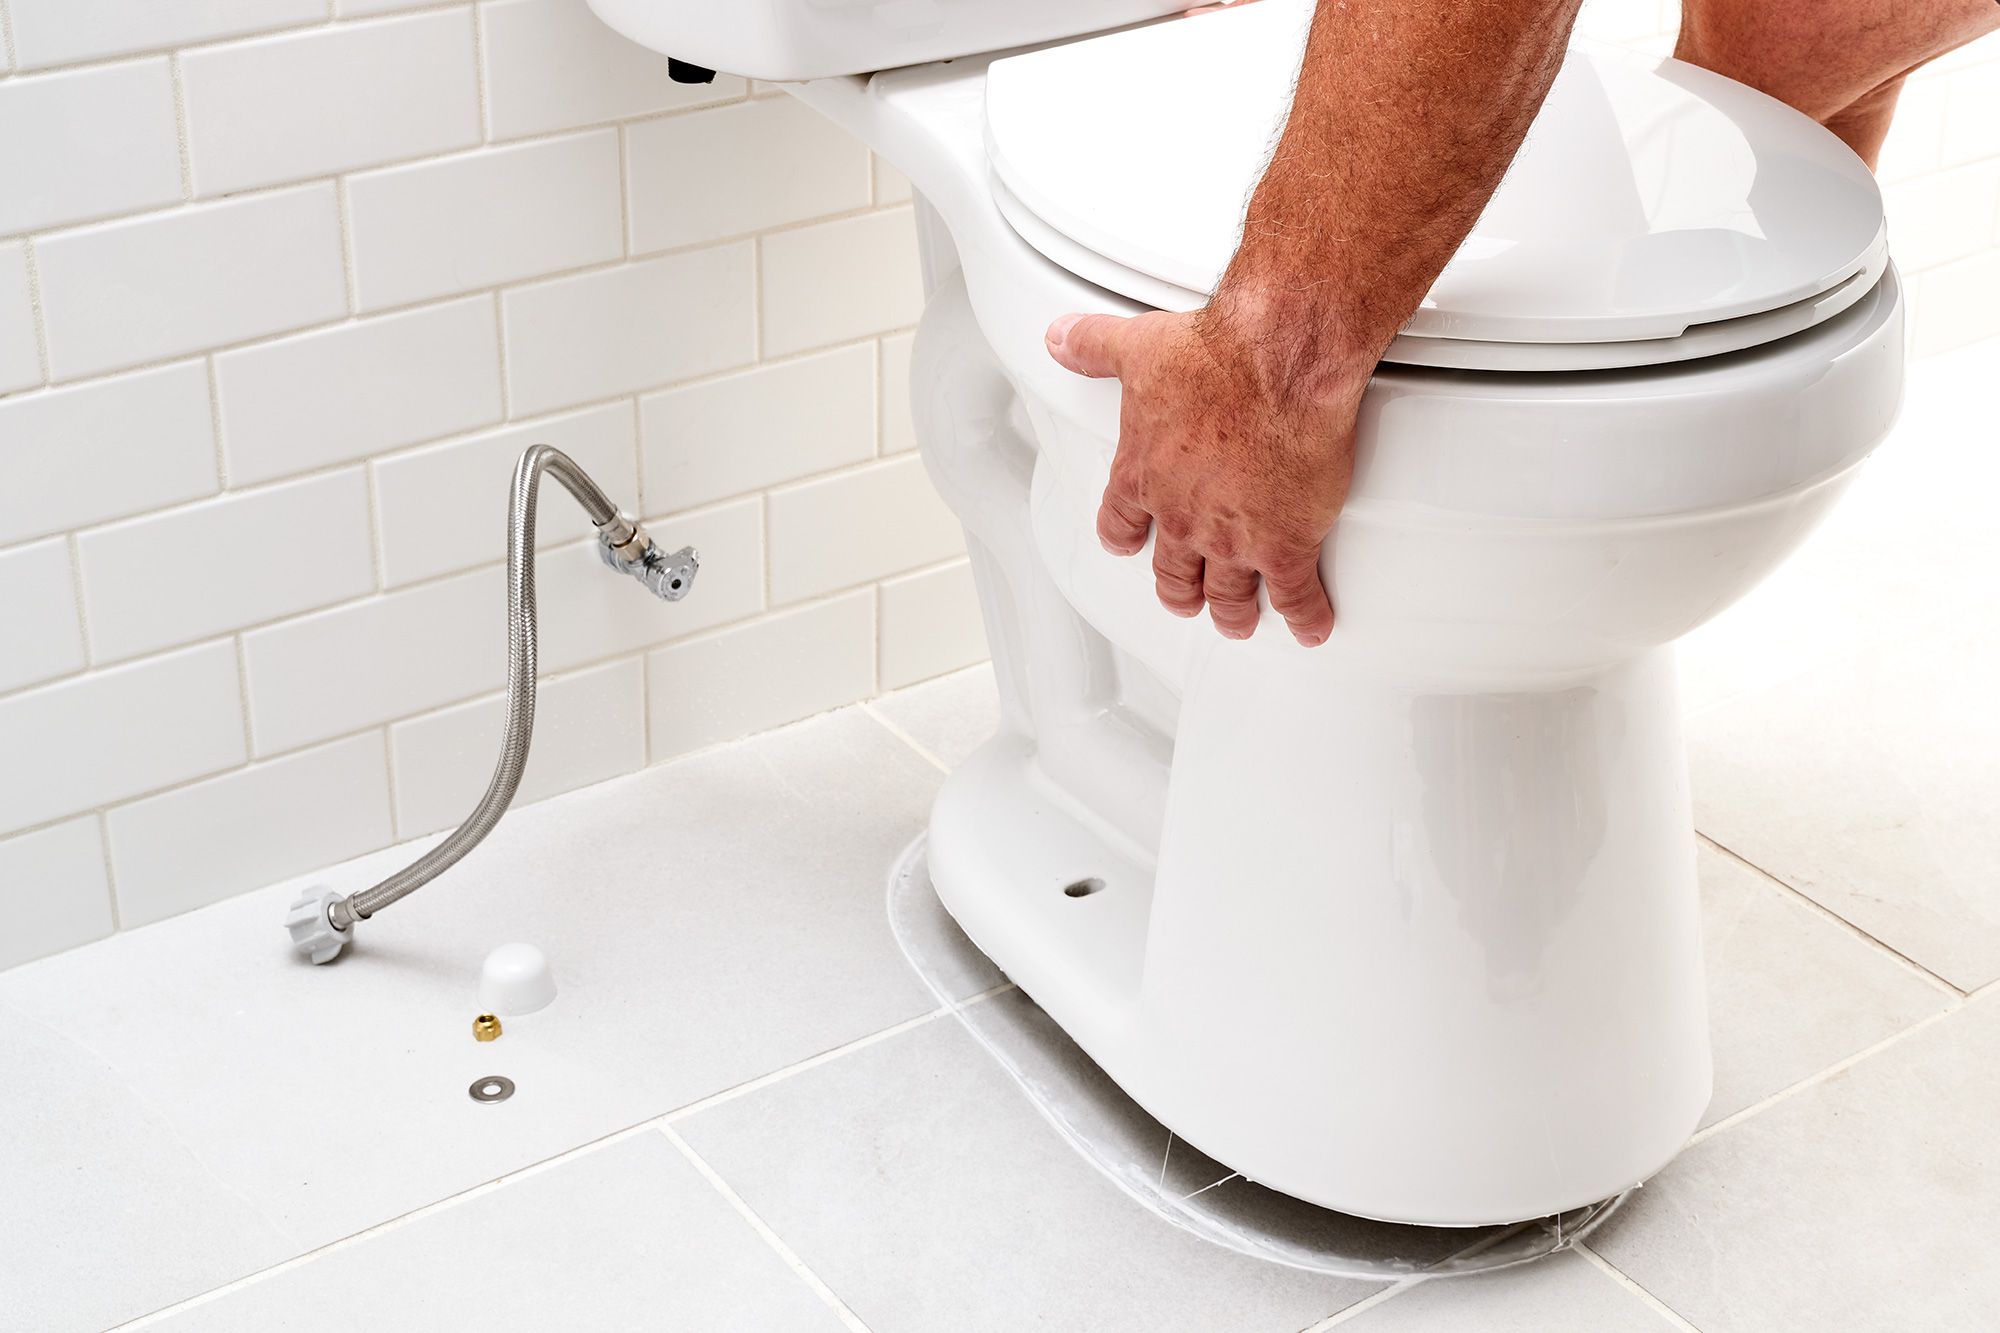 https://budgetsmallbathroom.com/how-heavy-are-toilets-factors-toilet-weigh/How heavy are toilets? 4 Basic factors end recommendation